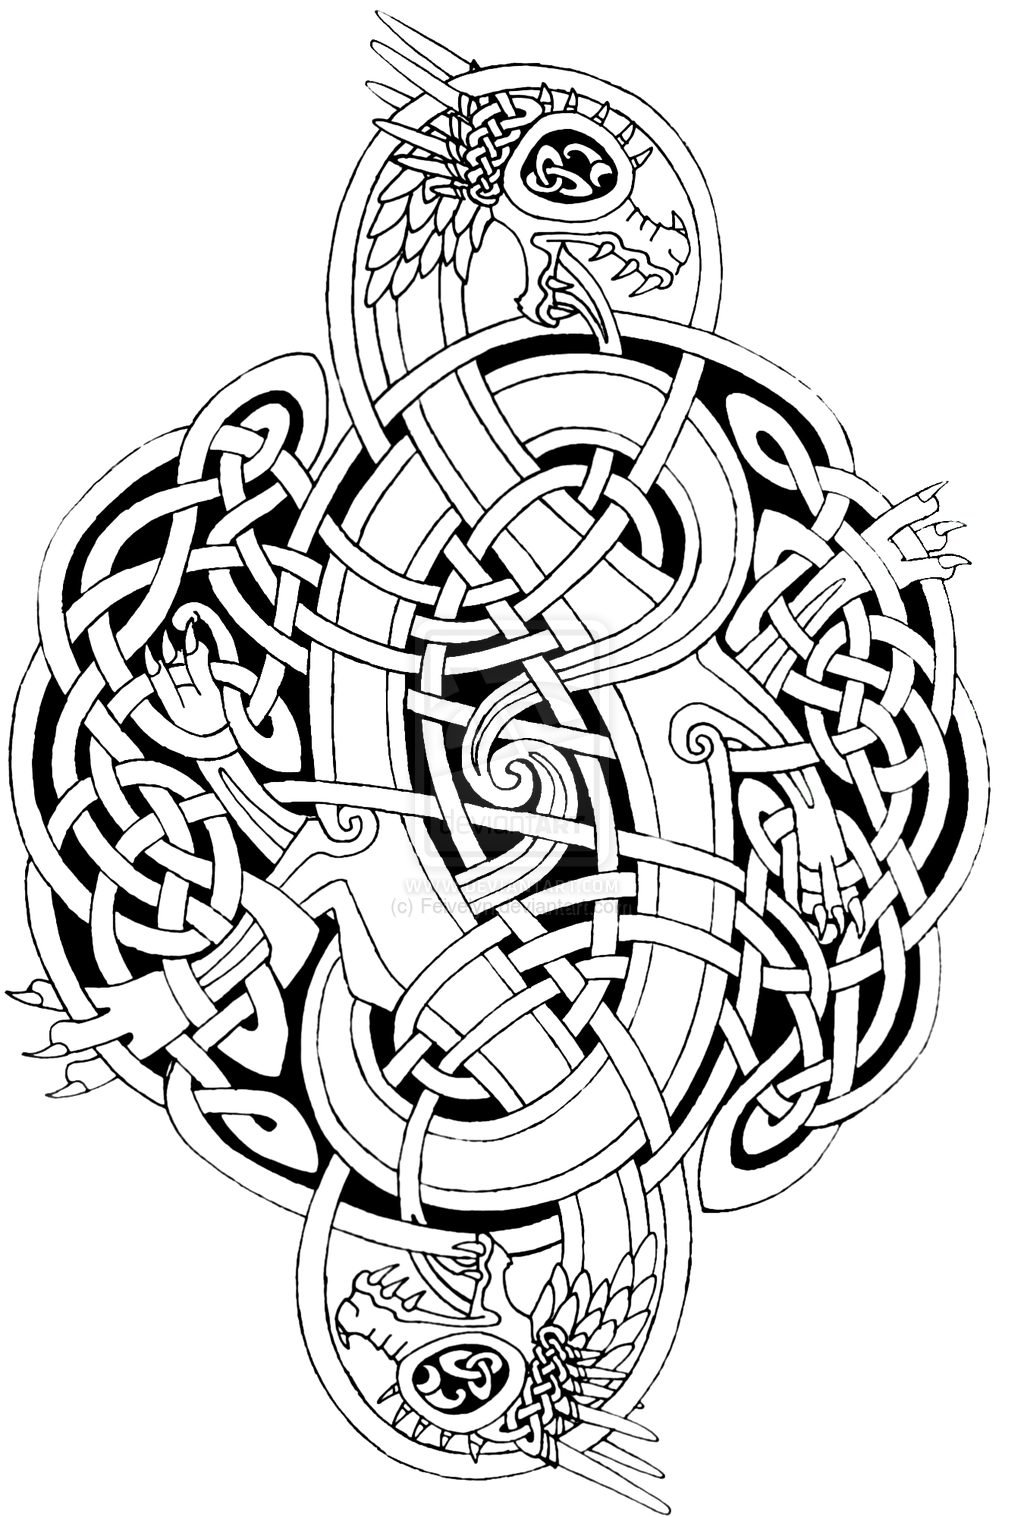 Celtic Kmot Mandala Coloring Pages - Ð¡oloring Pages For All Ages